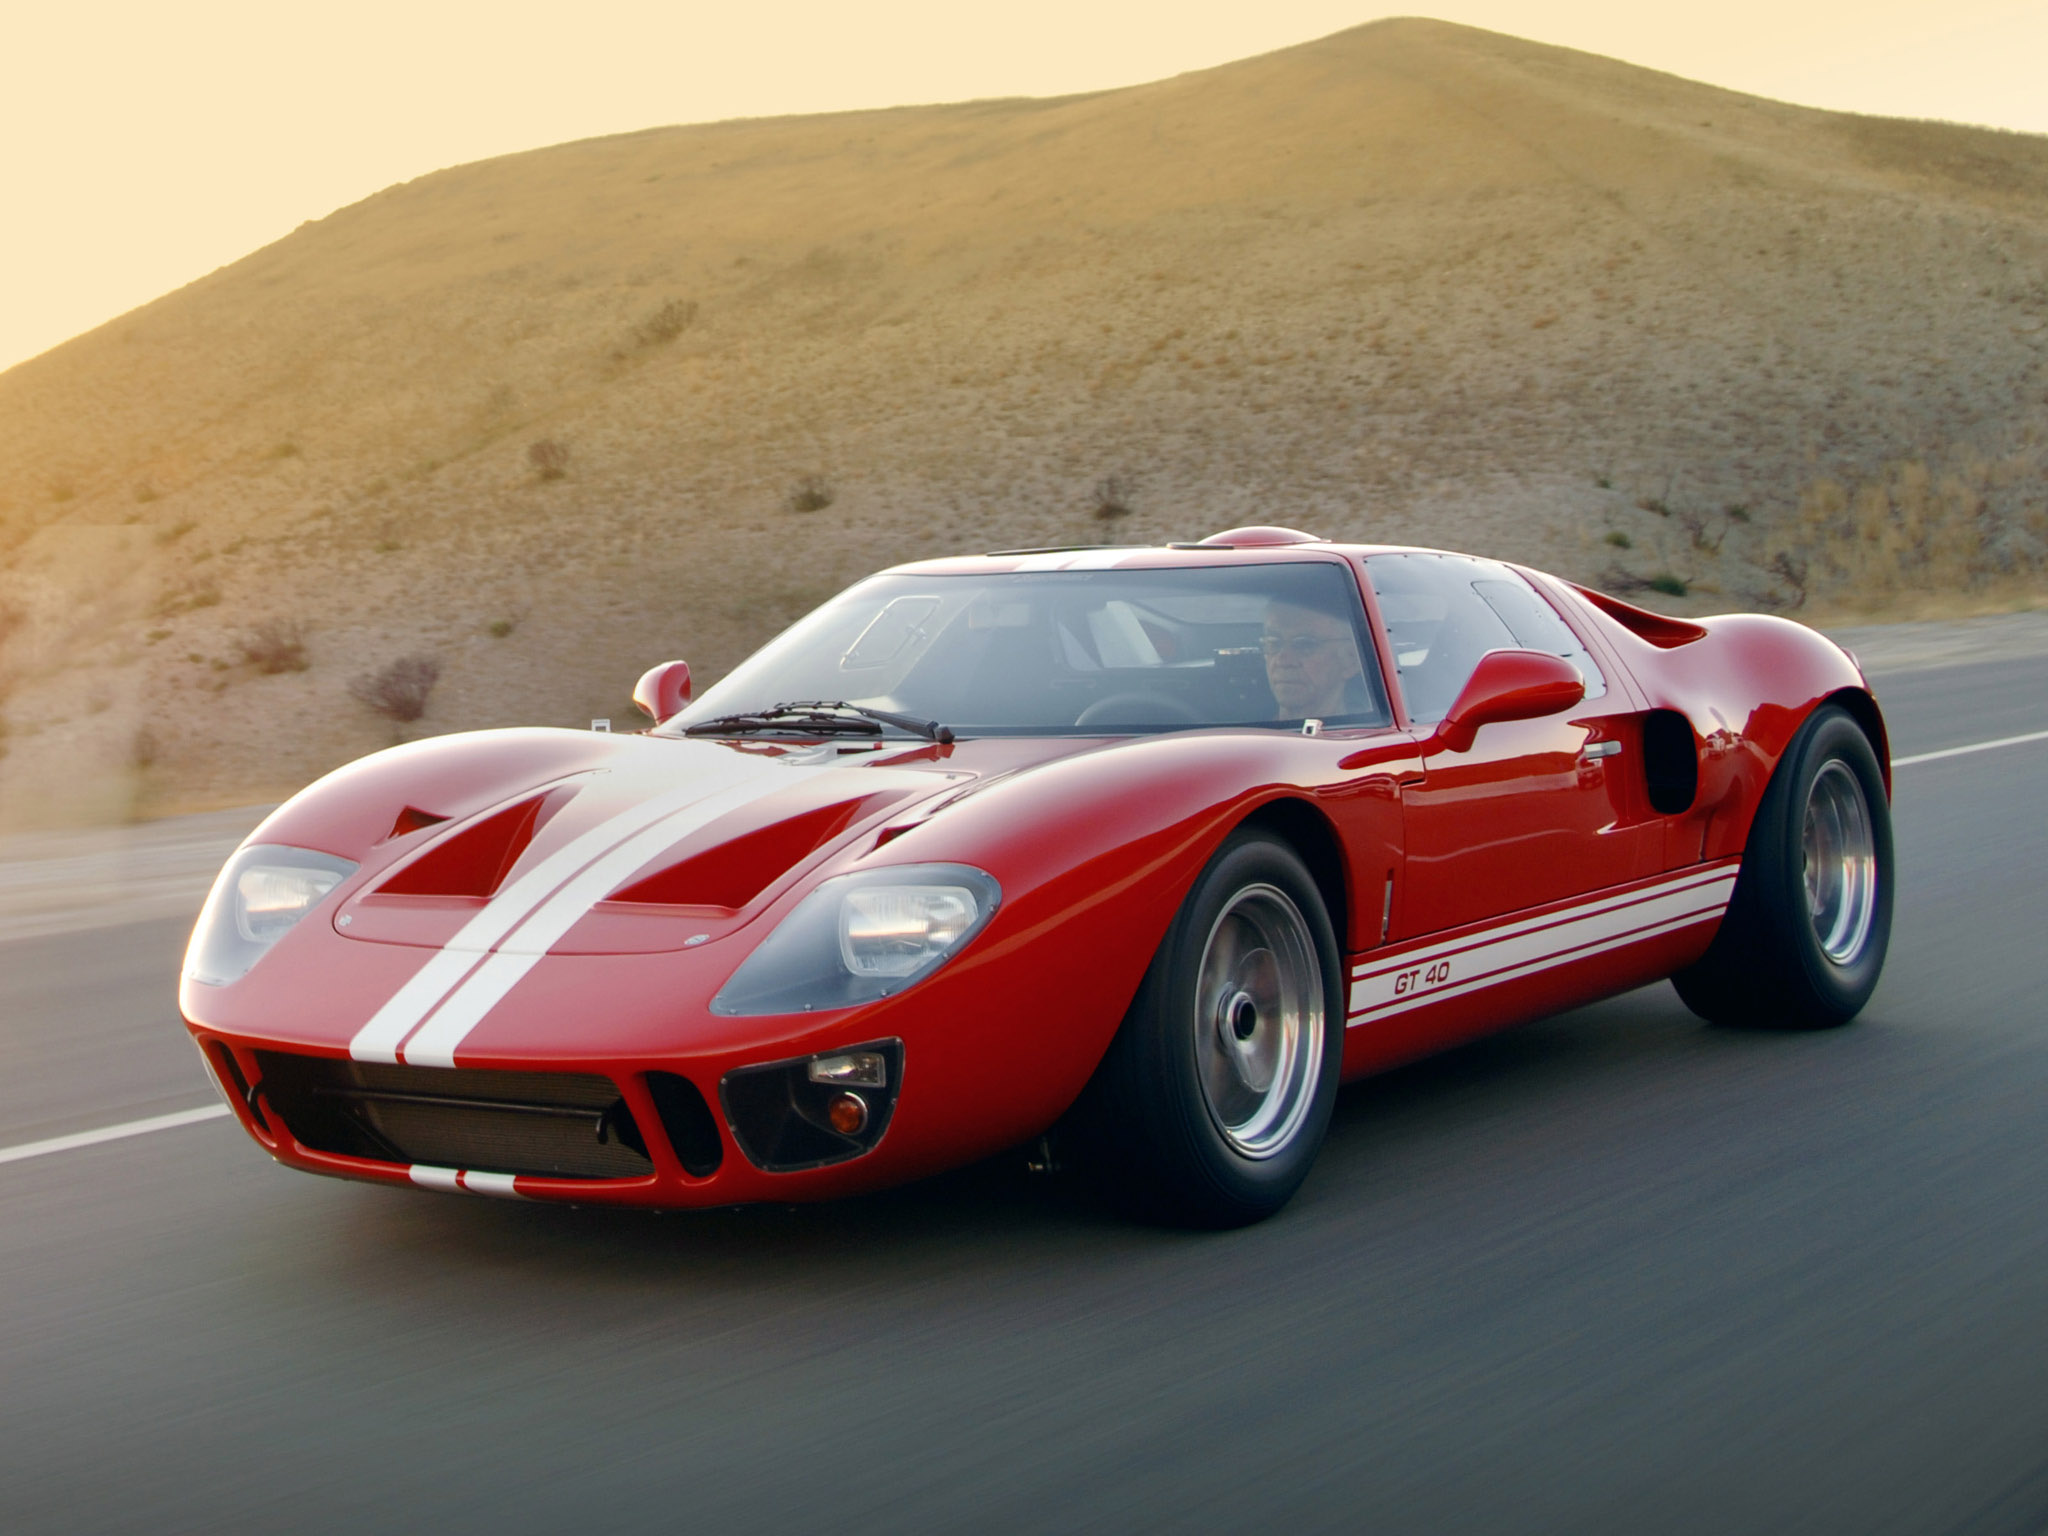 2007, Superformance, Ford, Gt40, Supercar, Supercars Wallpaper